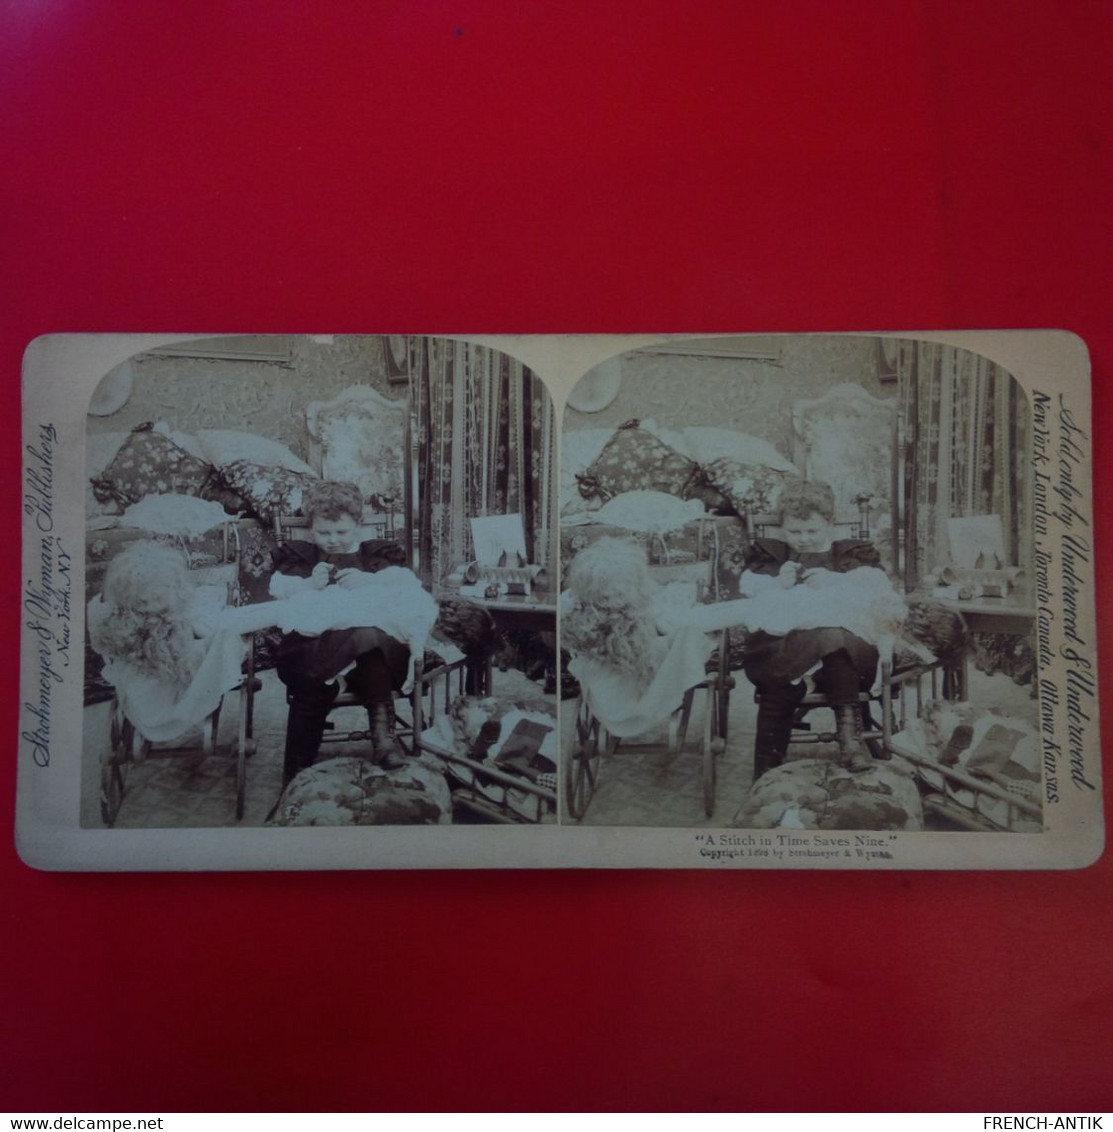 PHOTO STEREO A STITCH IN TIME SAVES NINE - Stereoscopic